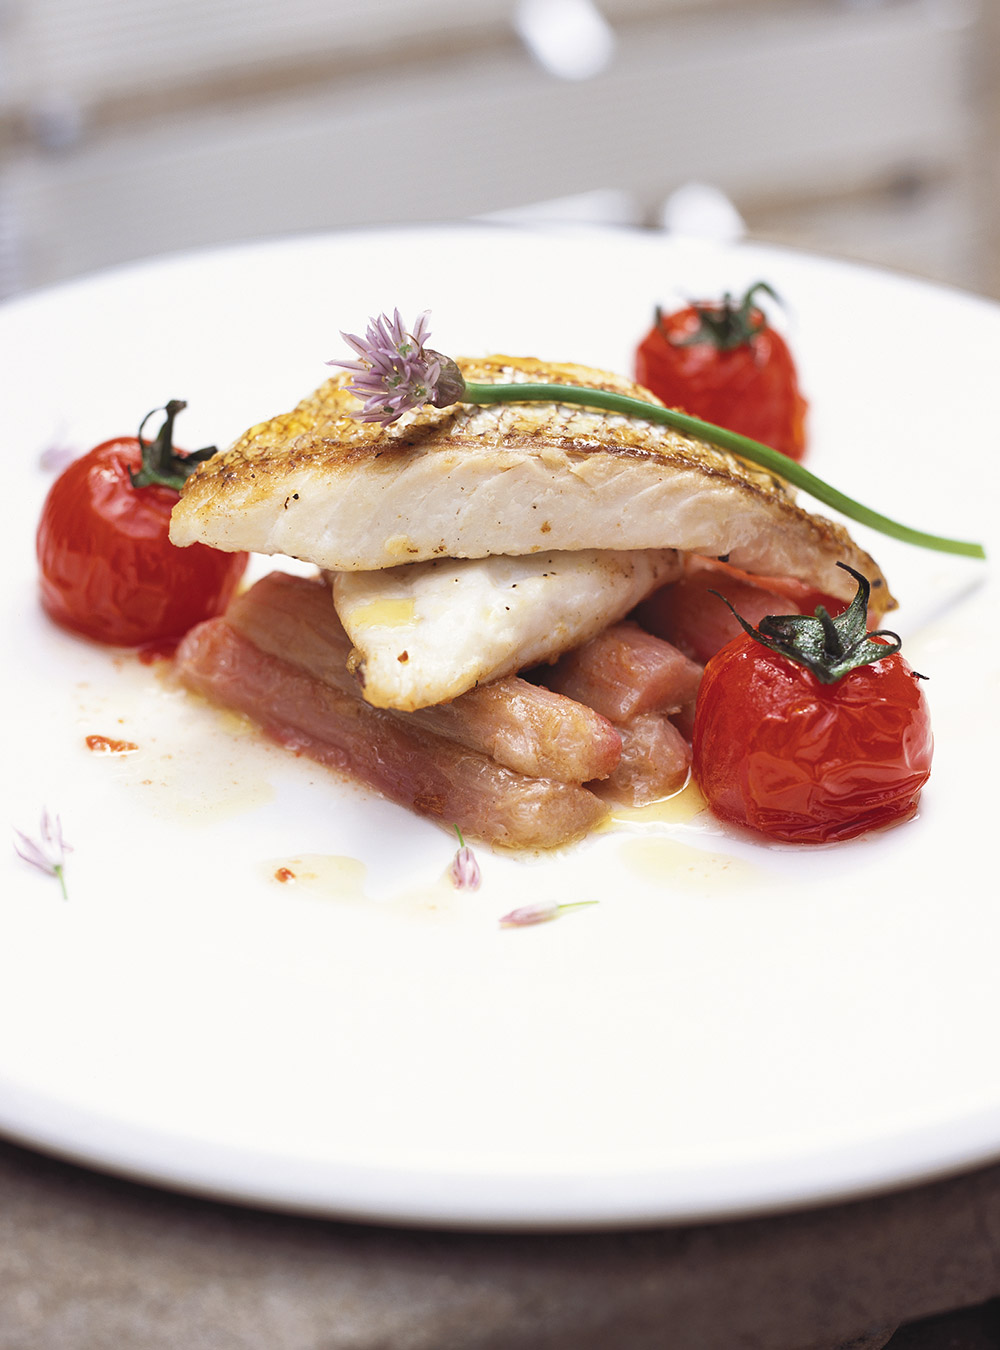 Rhubarb and Roasted Tomato Red Mullet